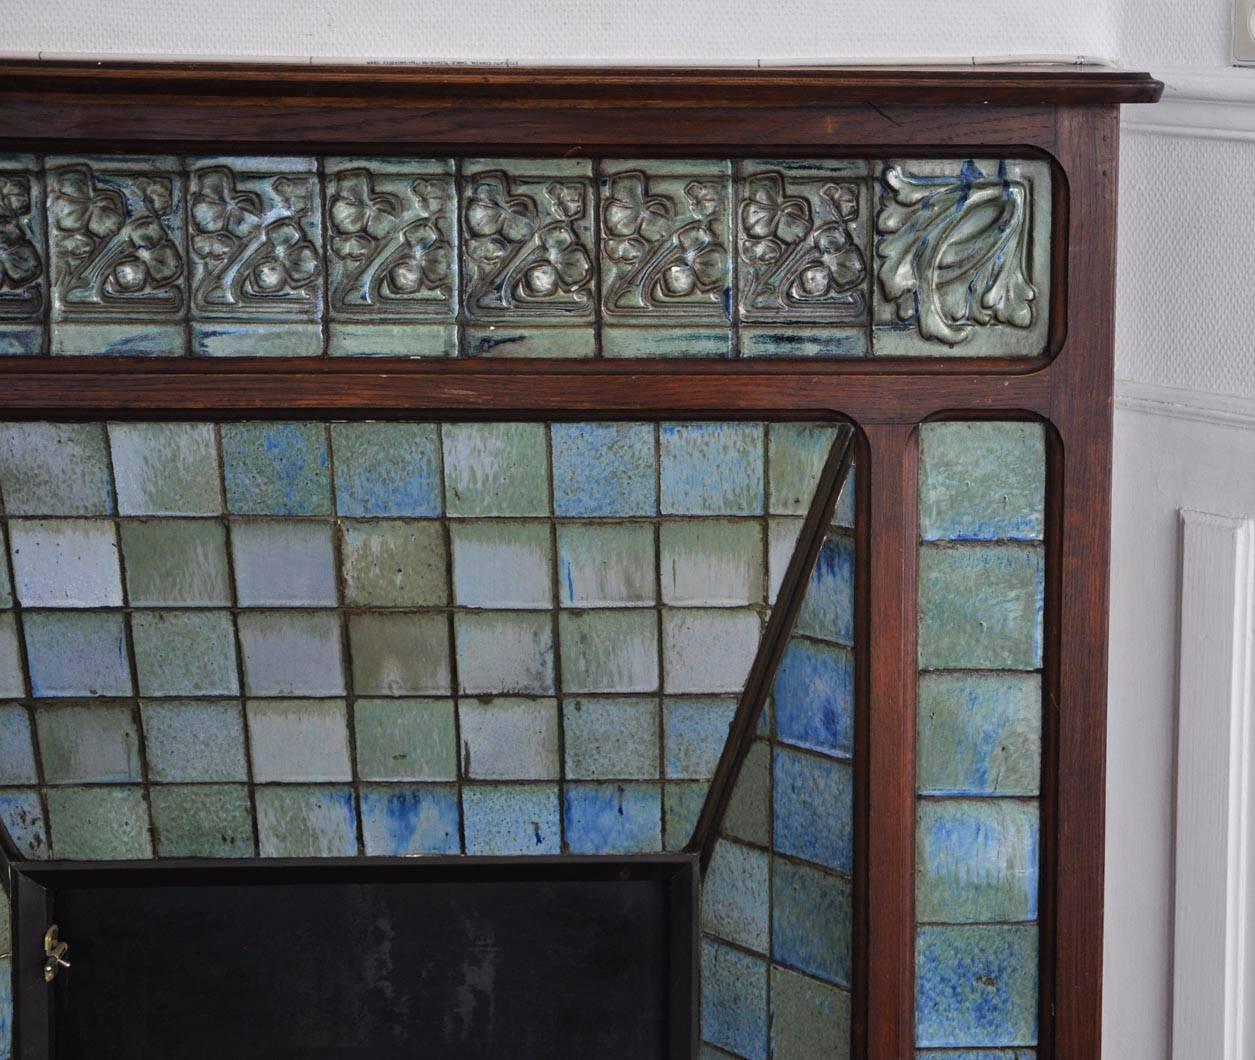 20th Century Art Nouveau Fireplace Attributed to Gentil & Bourdet Manufacture Oak and Ceramic